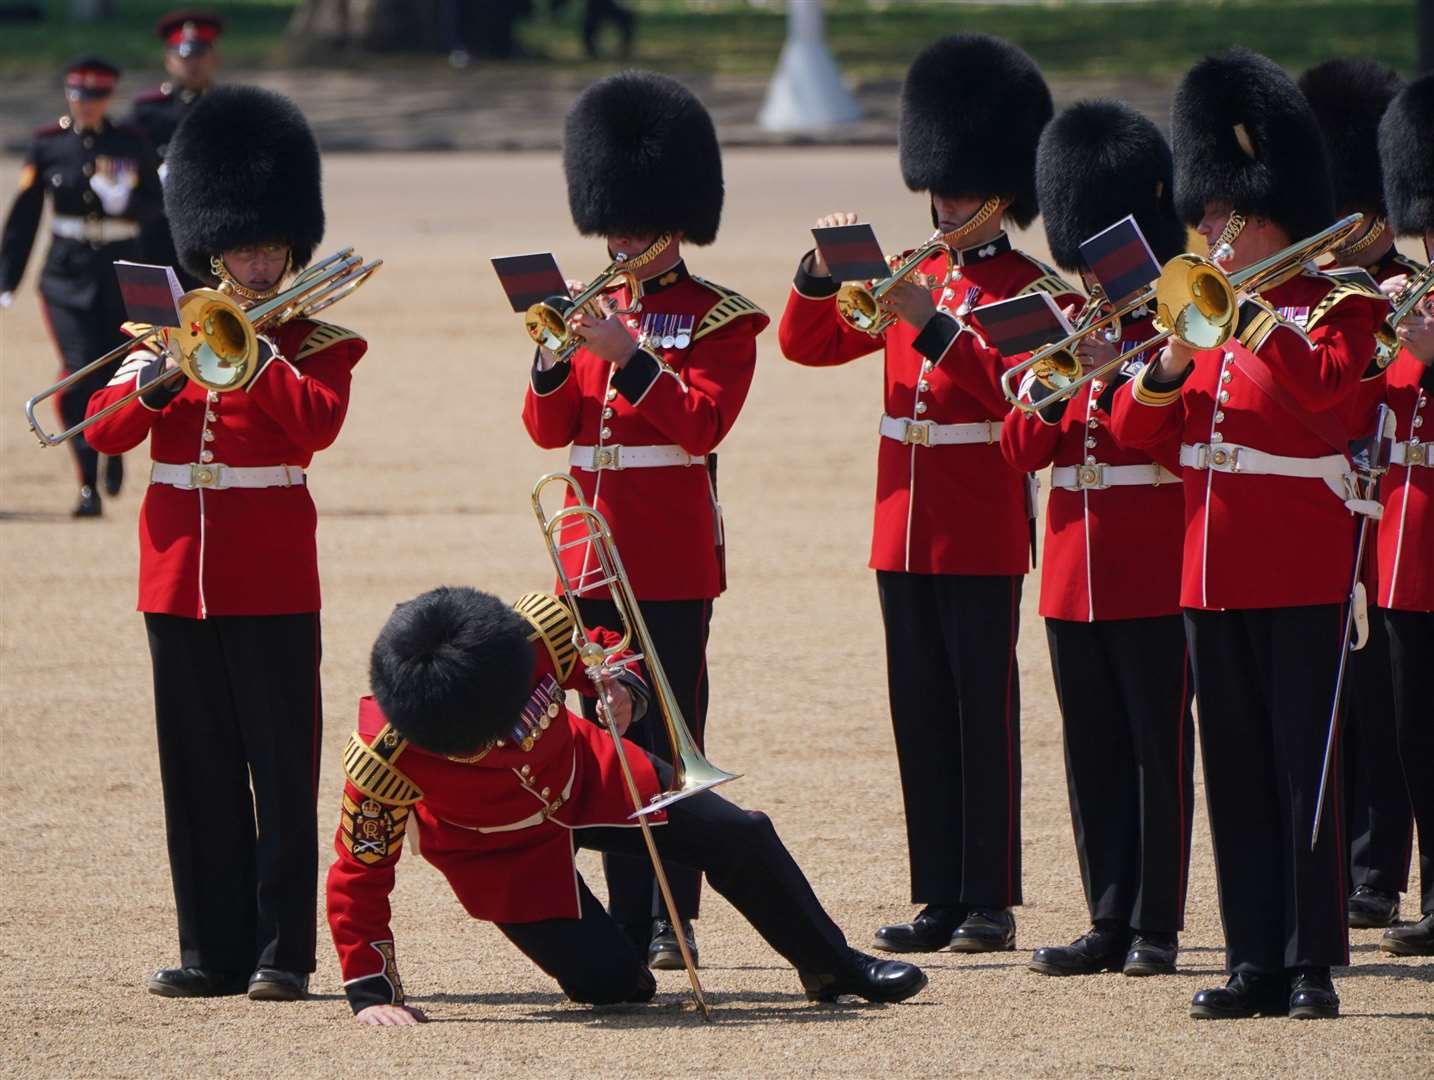 The heat proved difficult for one of the musicians in their heavy uniform (Jonathan Brady/PA)